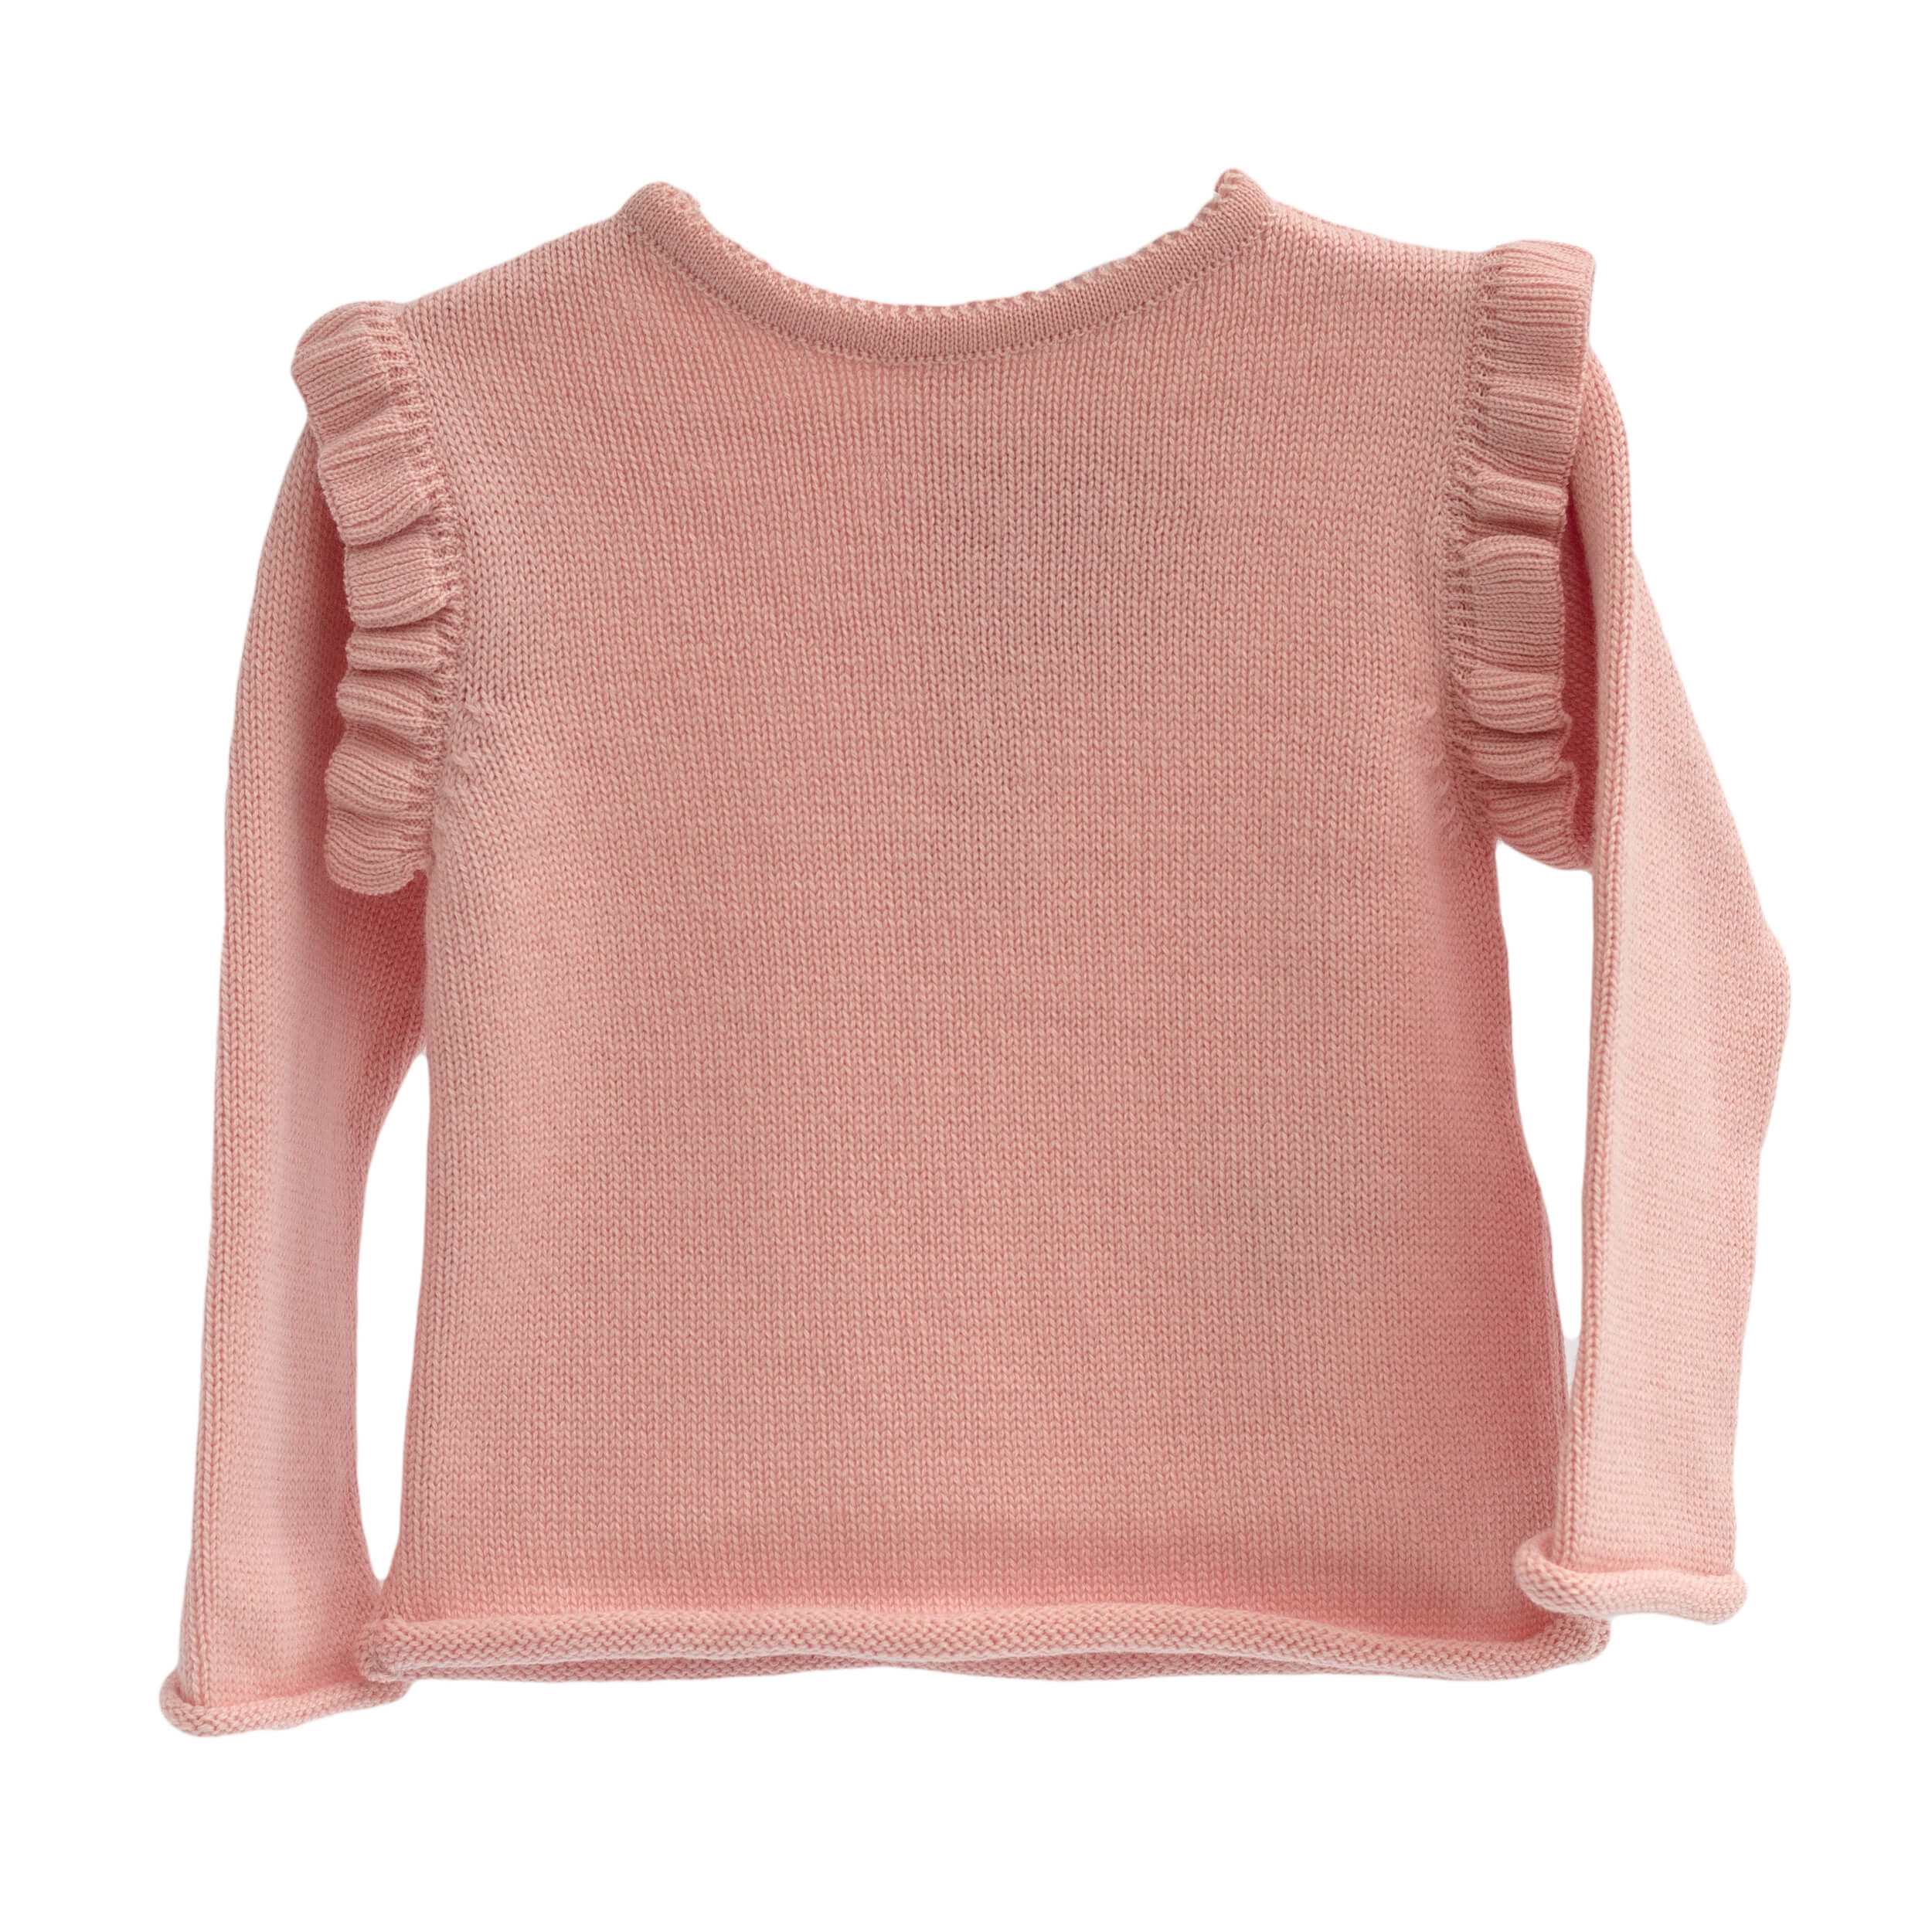 wedoble baby knit sweater in rose pink, made in portugal